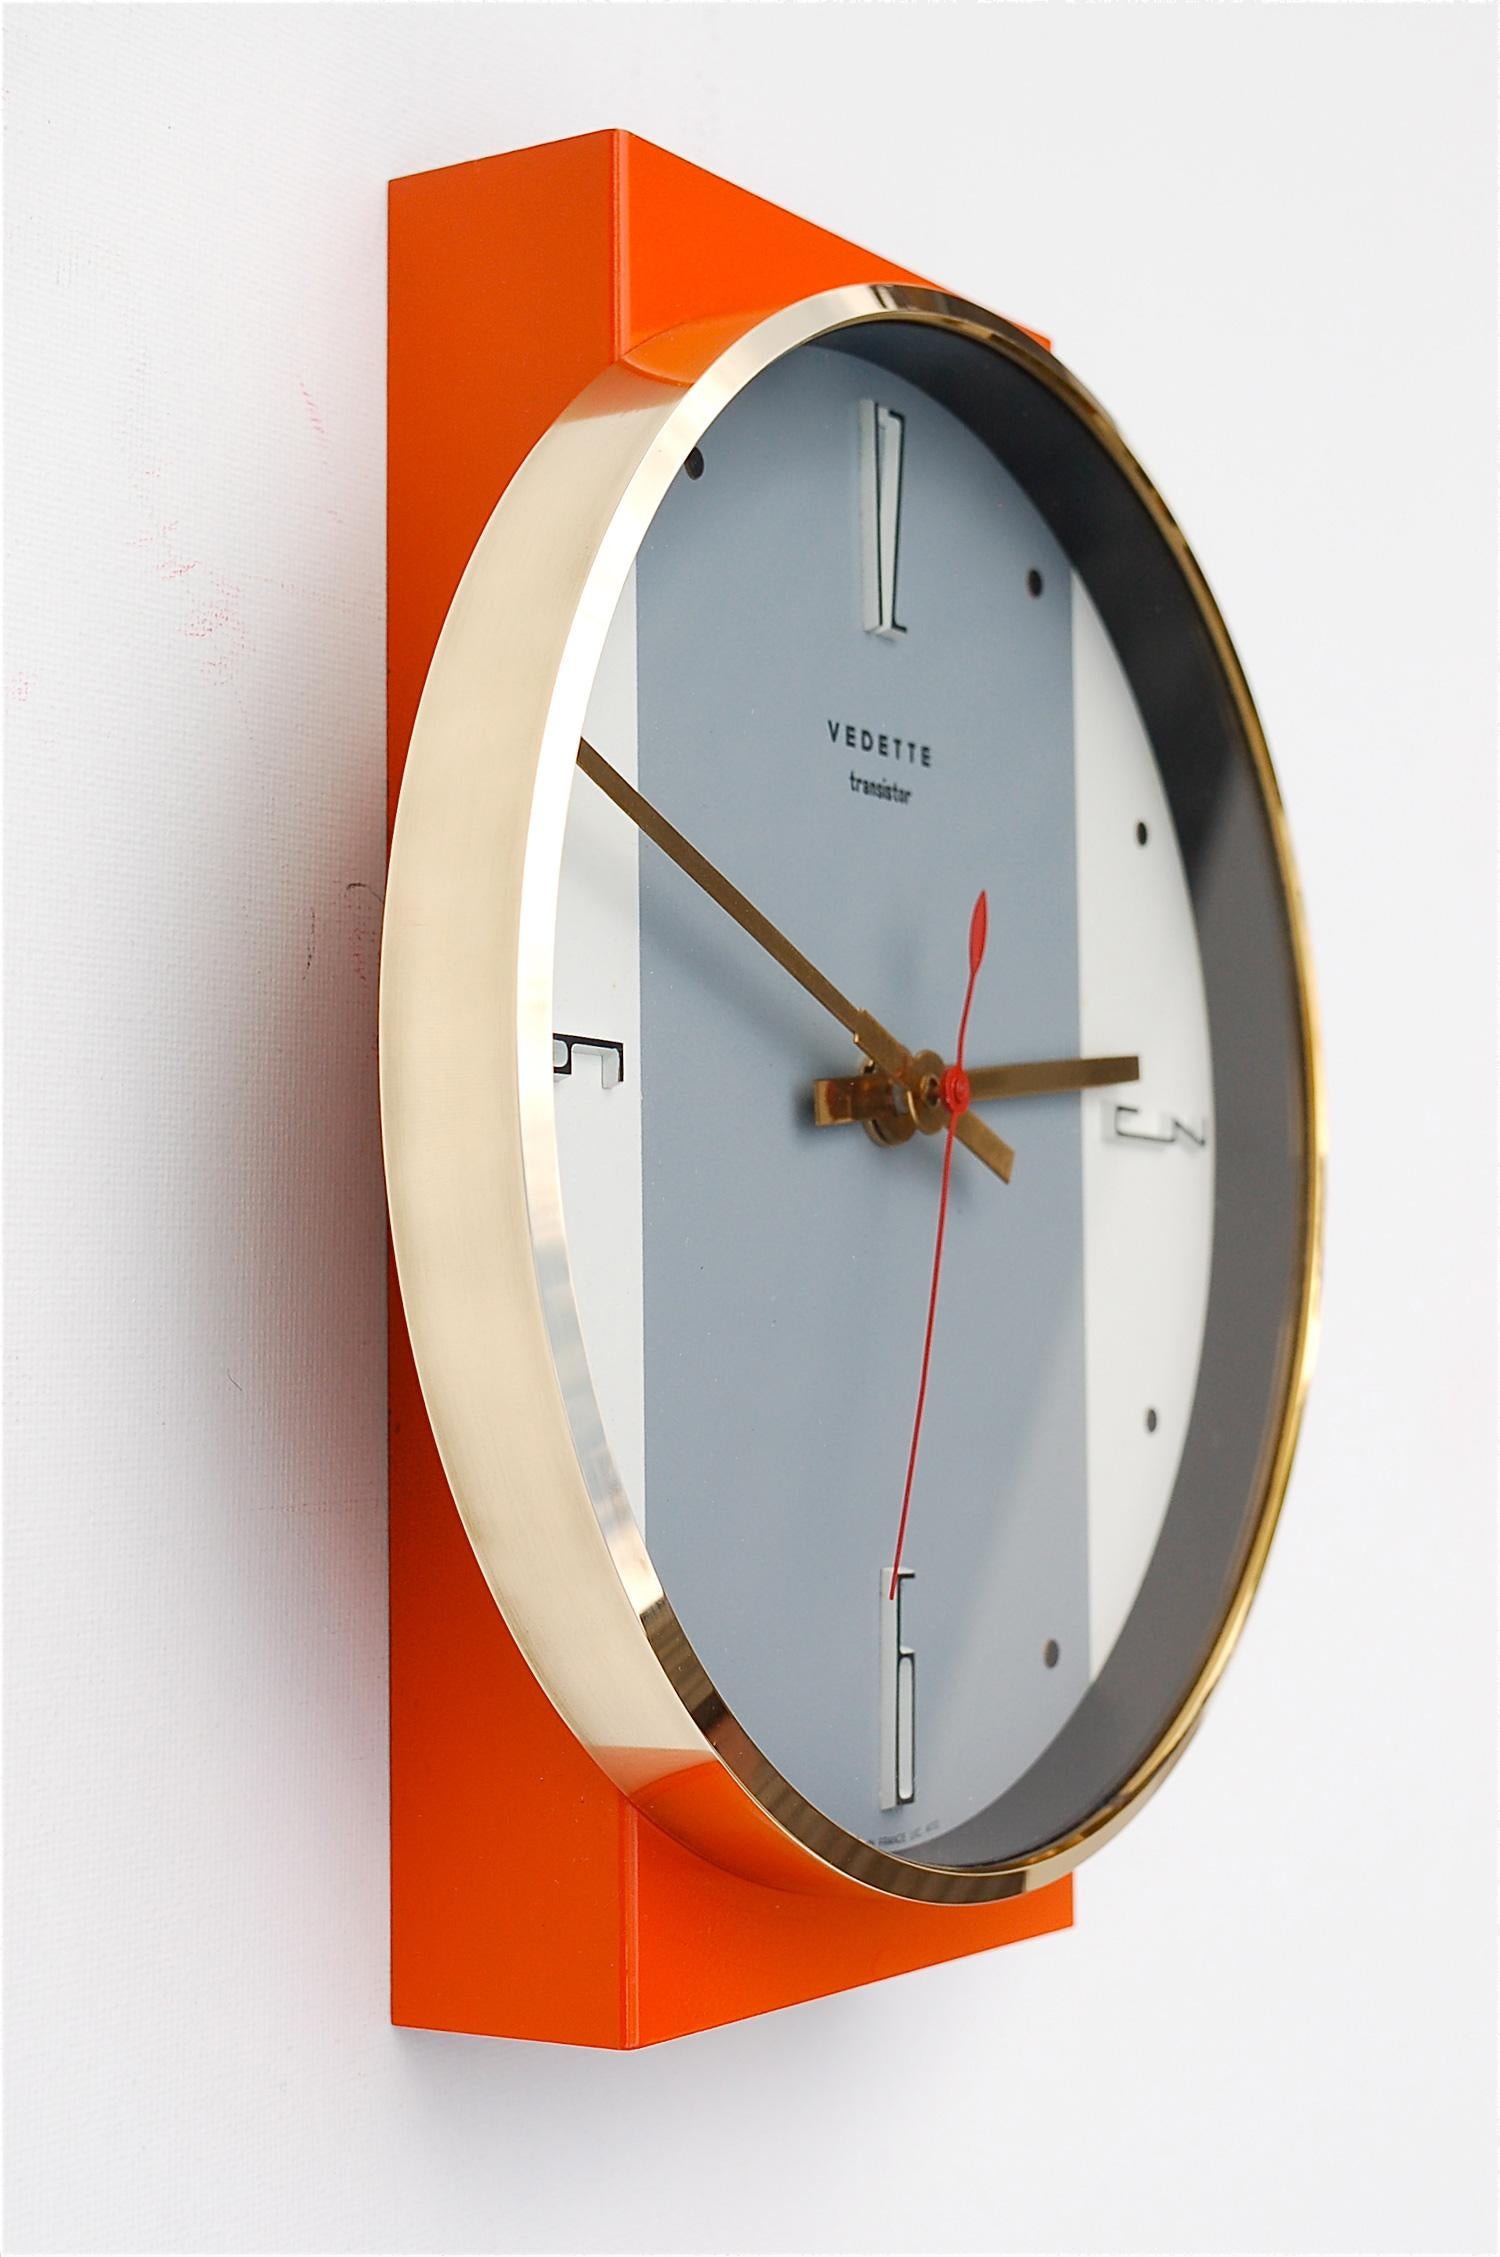 1960s vintage wall clock by French manufacturer Vedette. The circular clock face sits on a raised, orange lacquered, rectangular base. A broad grey stripe that runs across the face of the clock accentuates the vertical line of the design. The clock